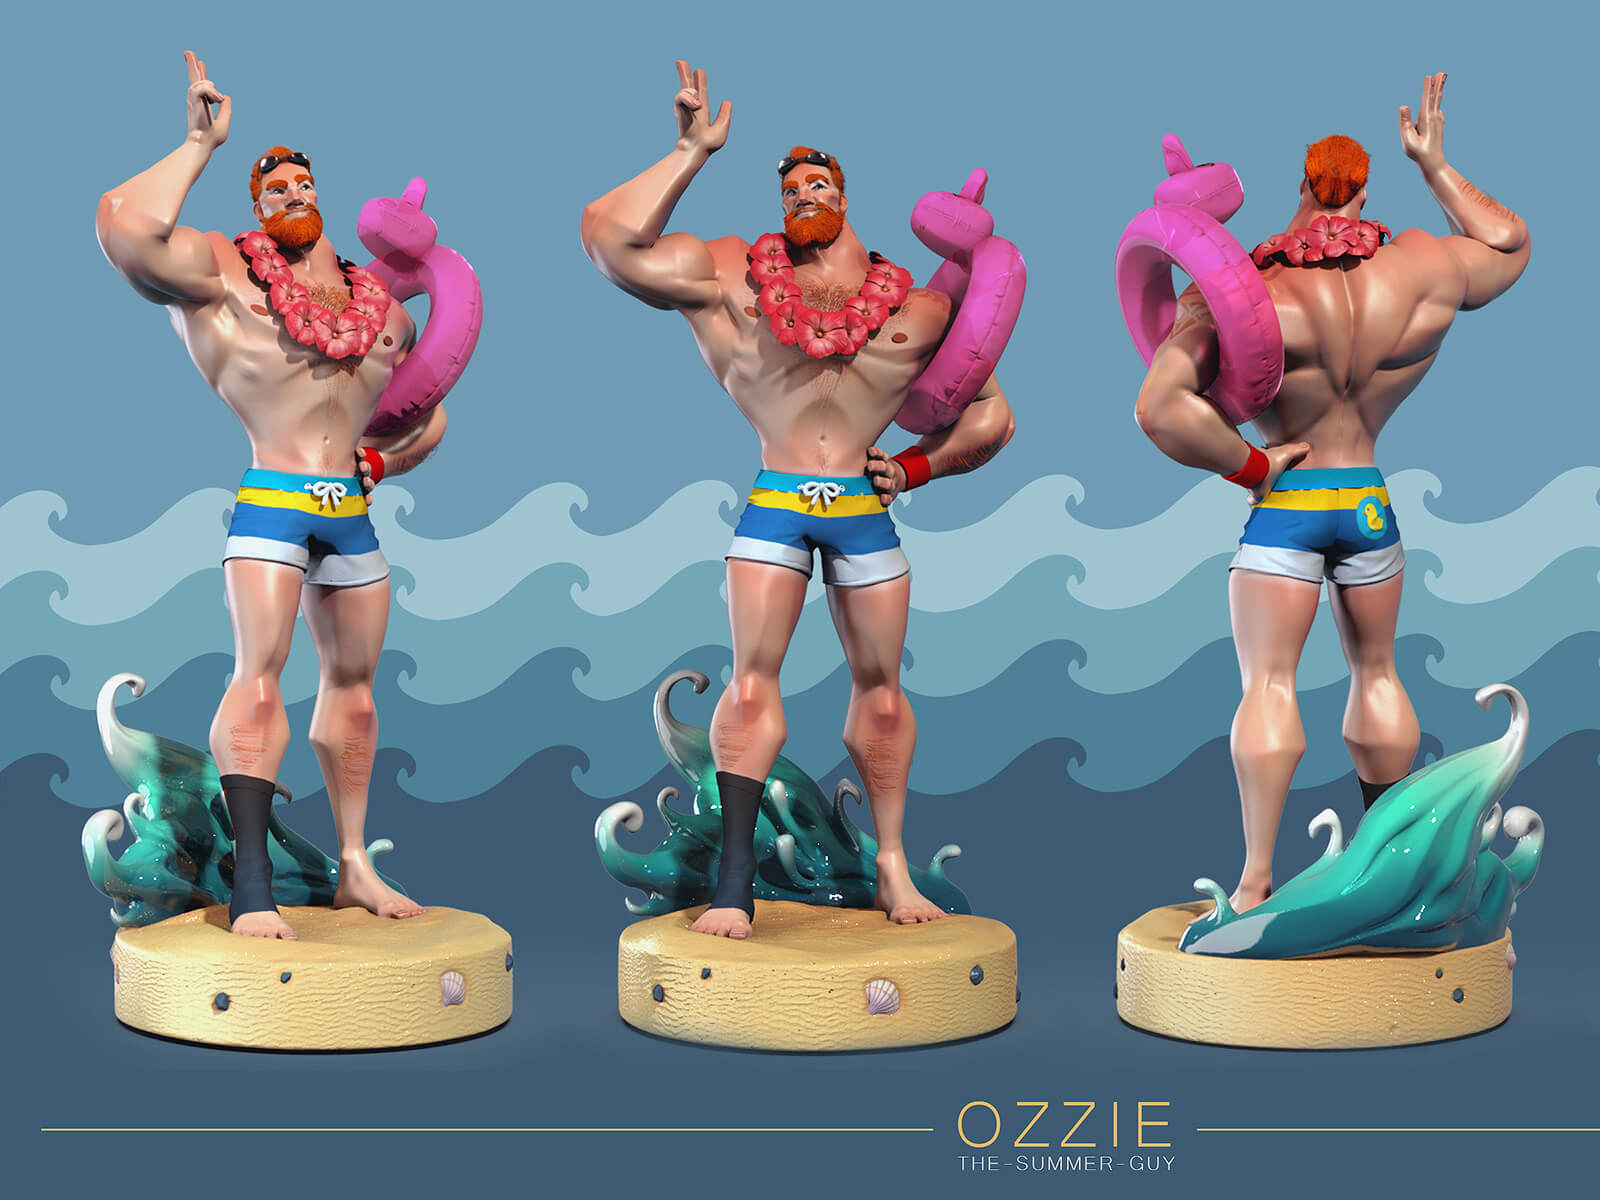 Multiple views of a muscular man wearing swimming trunks and a lei